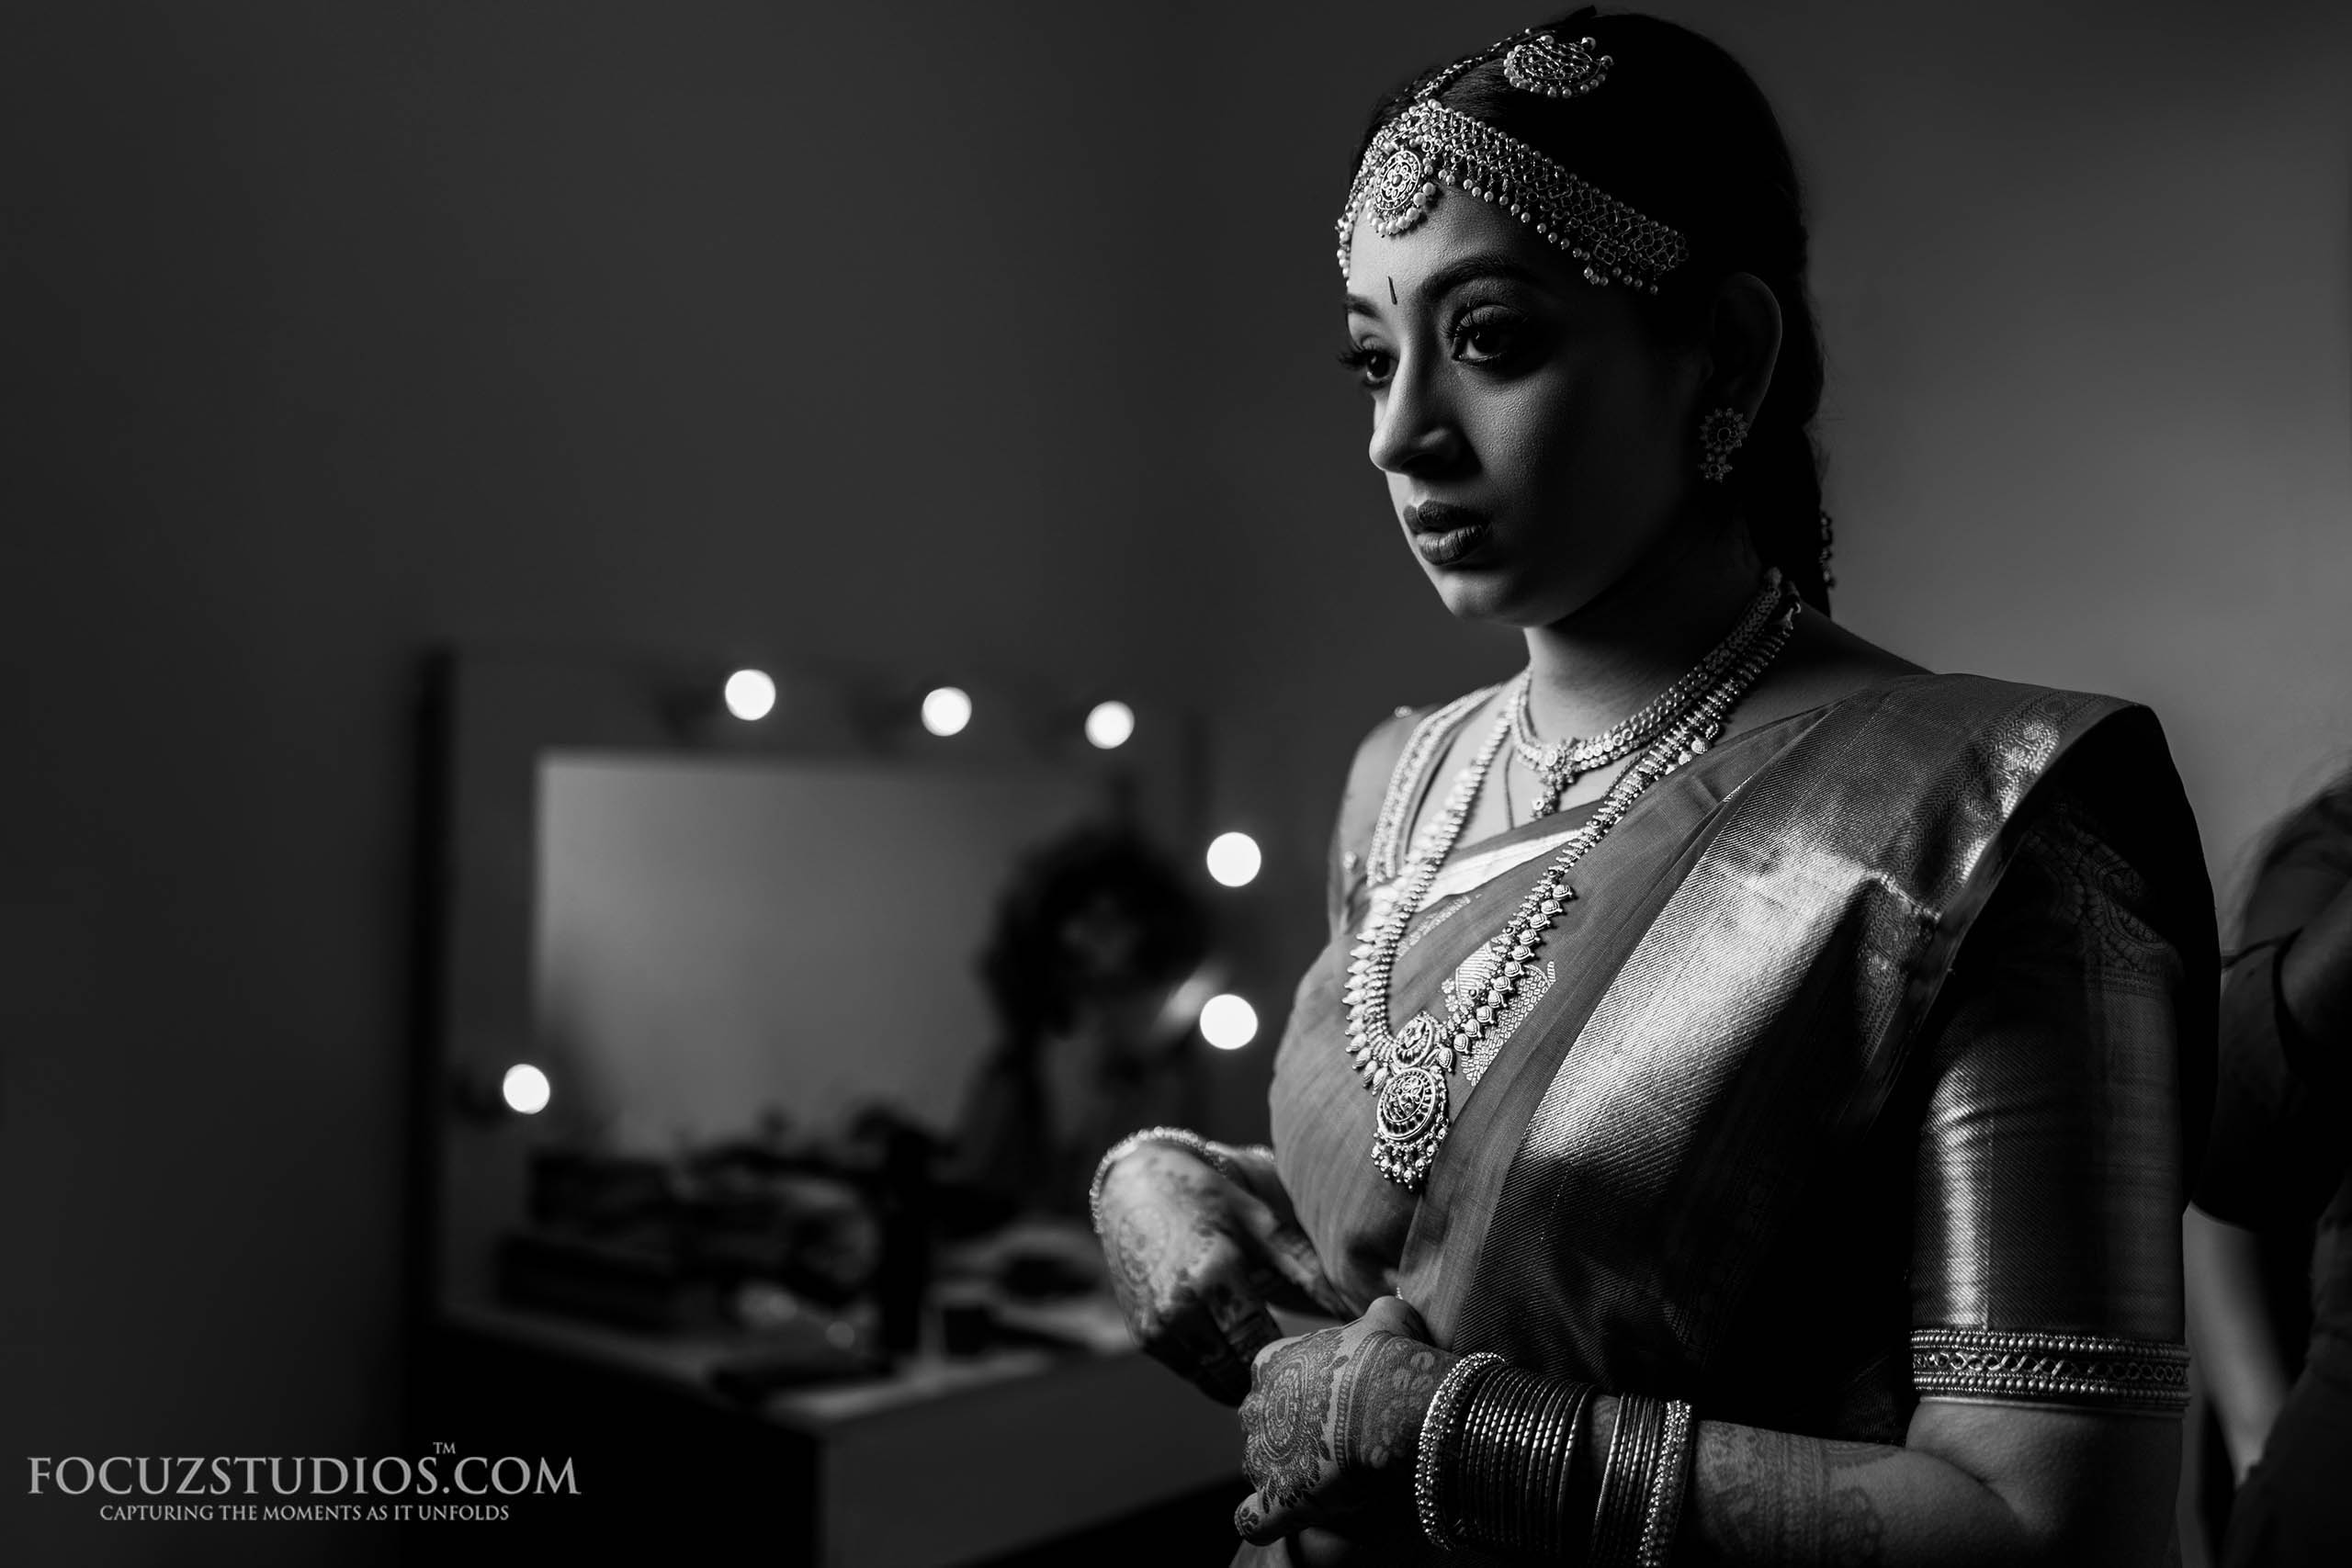 south-indian-bride-getting-ready-candid-wedding-photography-12